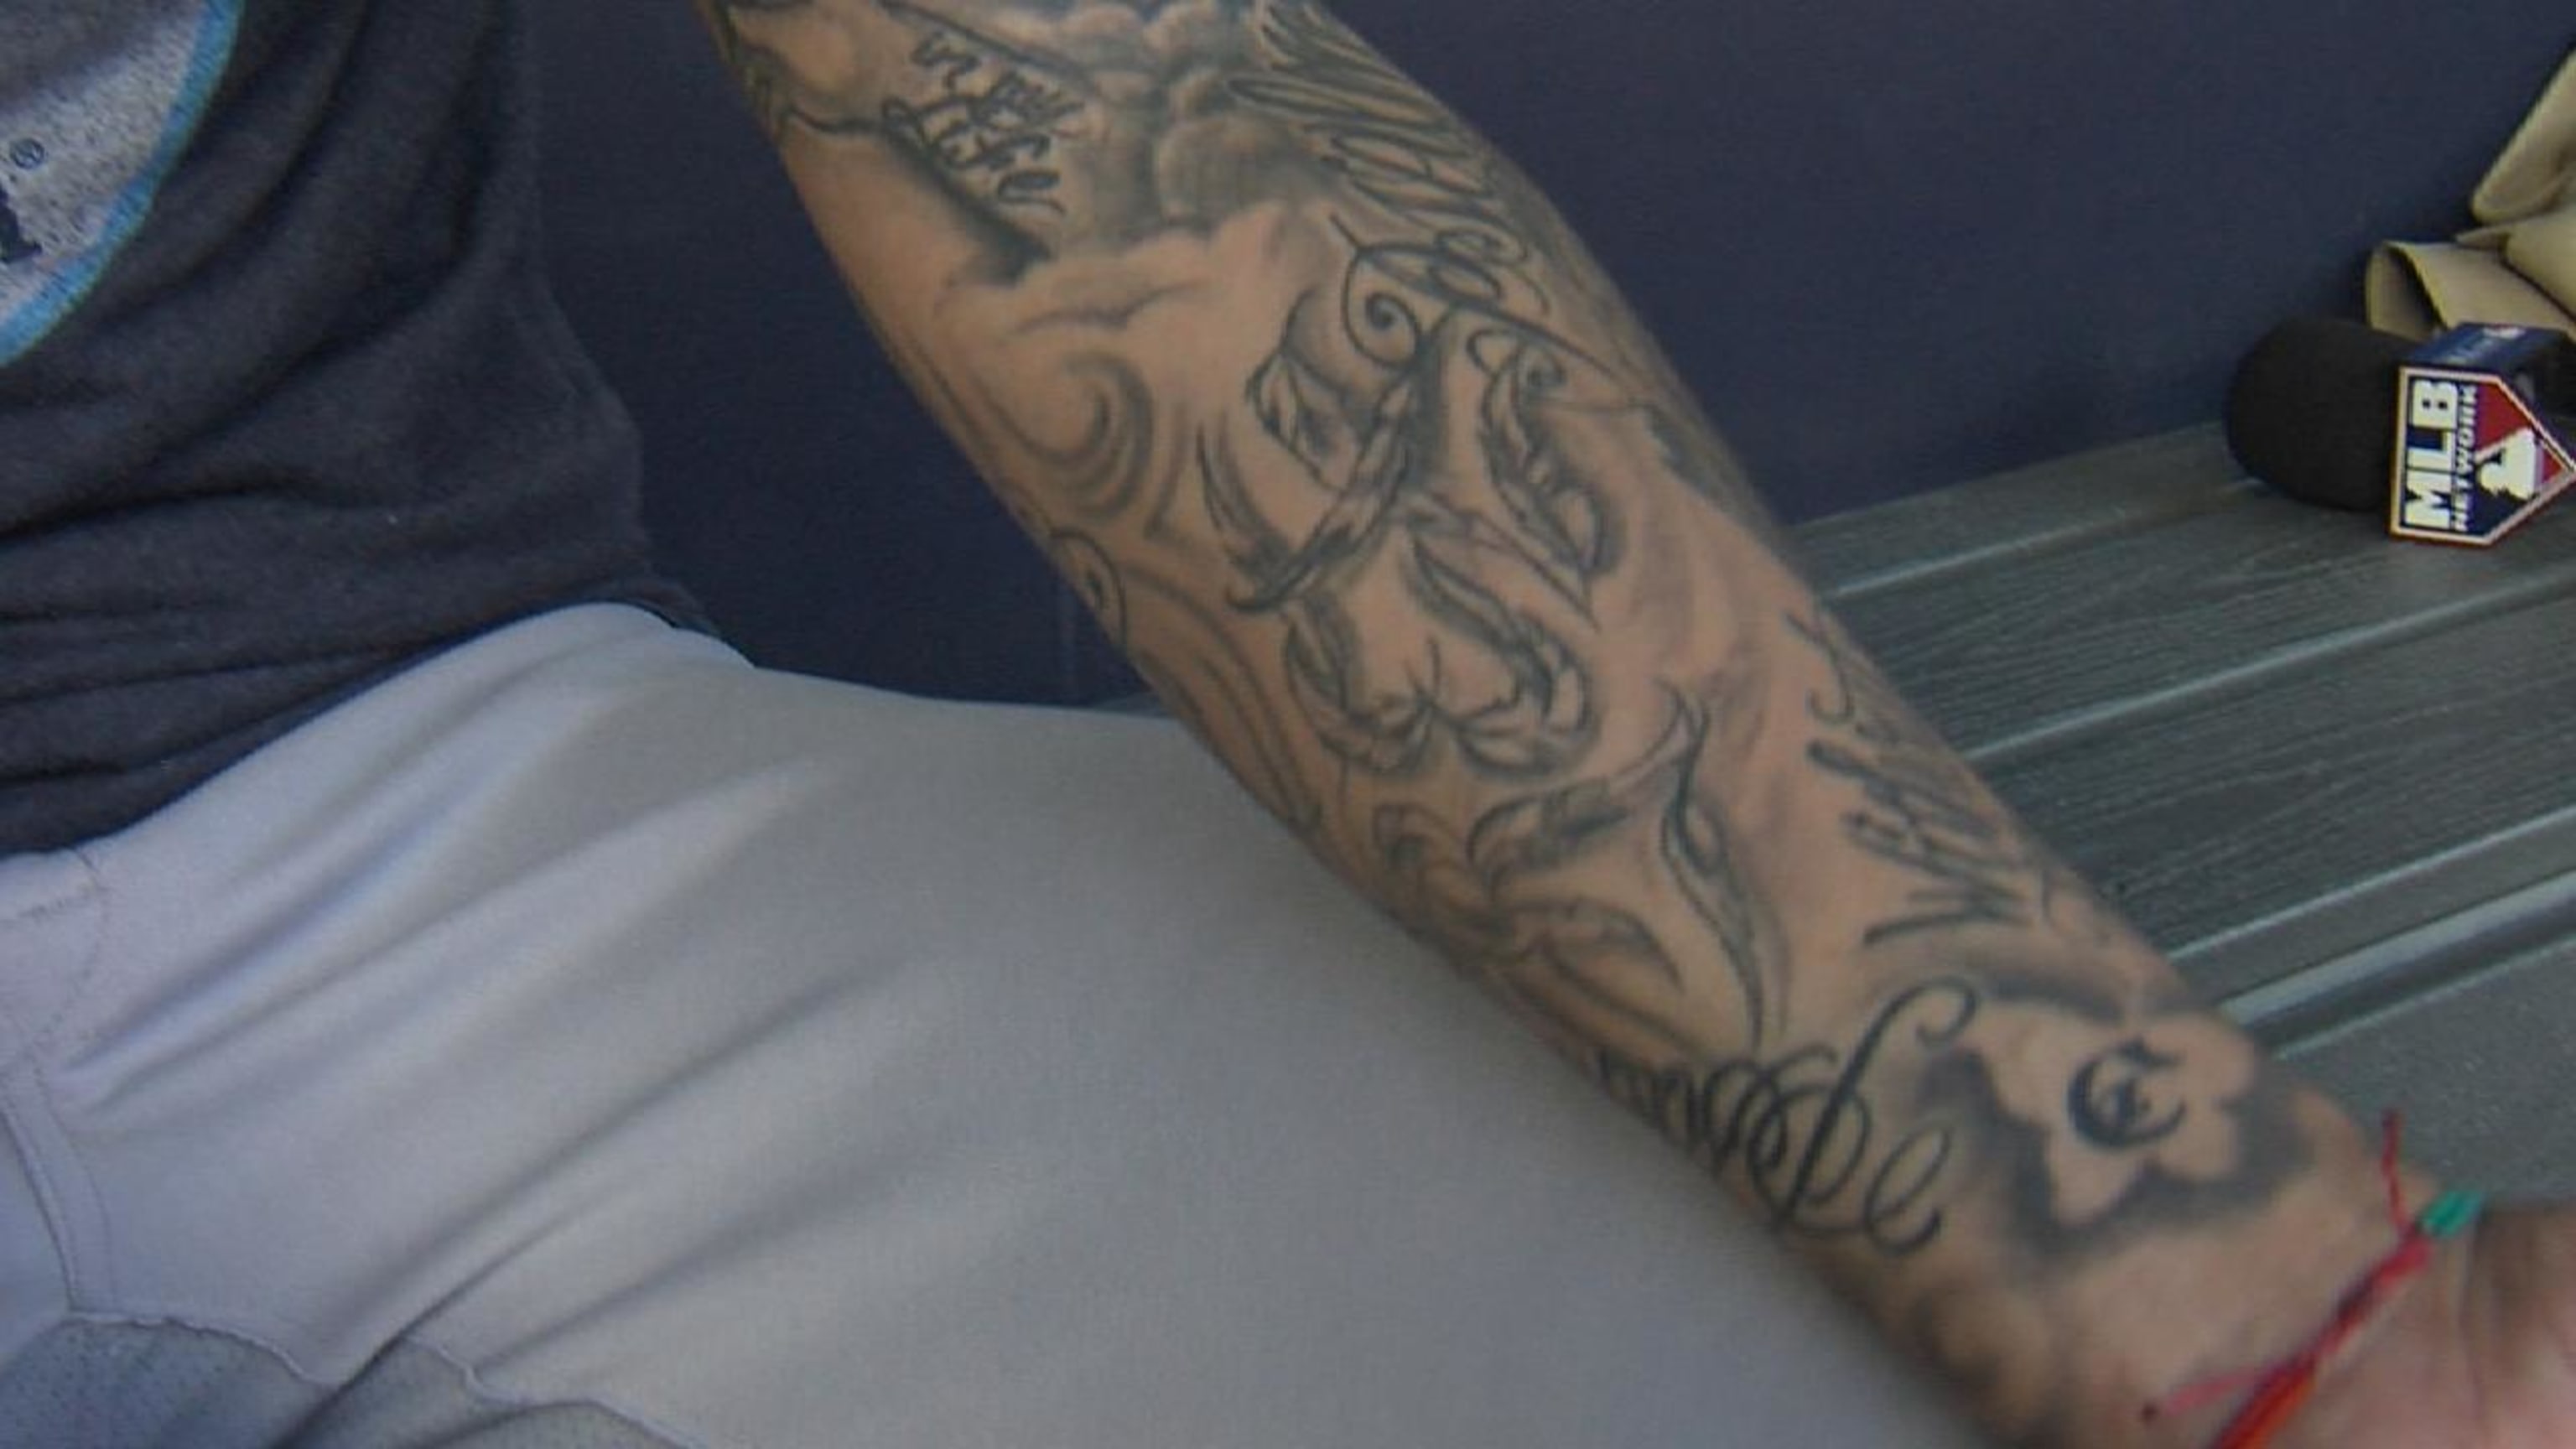 Sergio Romo explains the meaning behind all his amazing tattoos